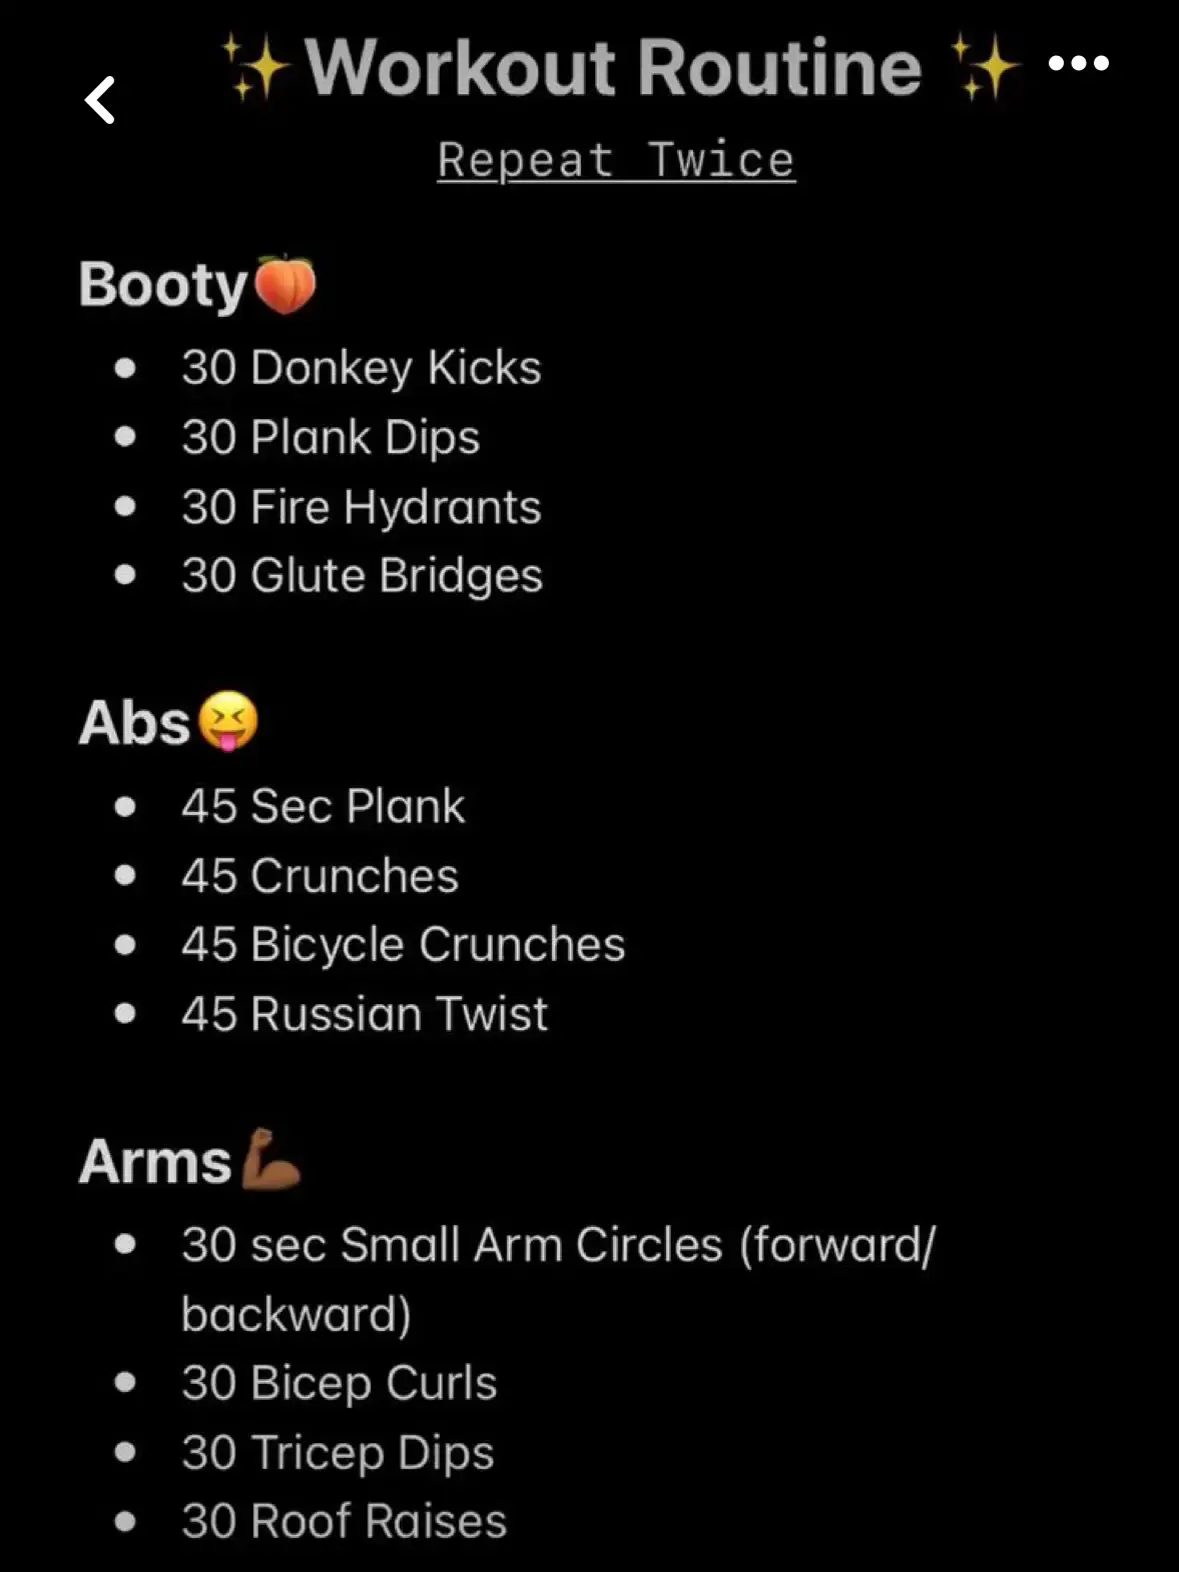 20 Top Arm Workout Routine For Toning